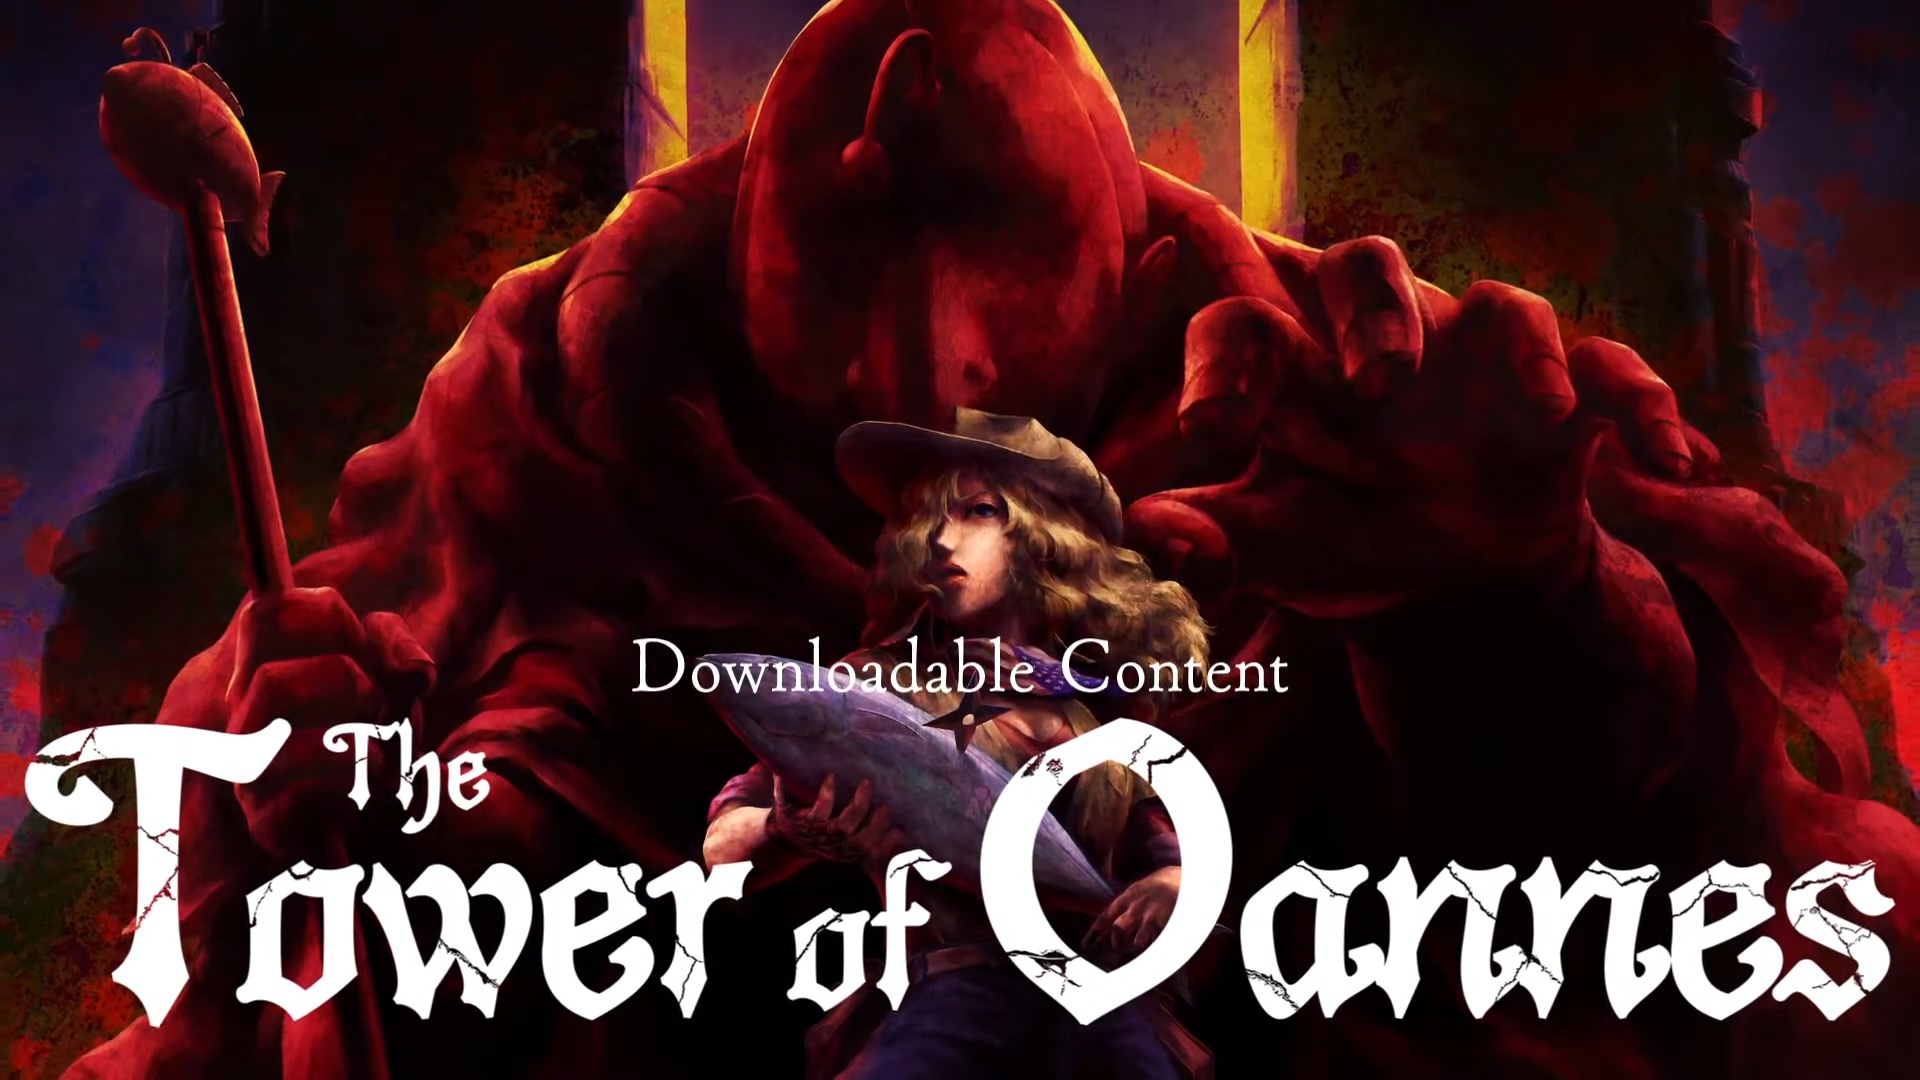 La-Mulana 2 DLC The Tower of Oannes Announced